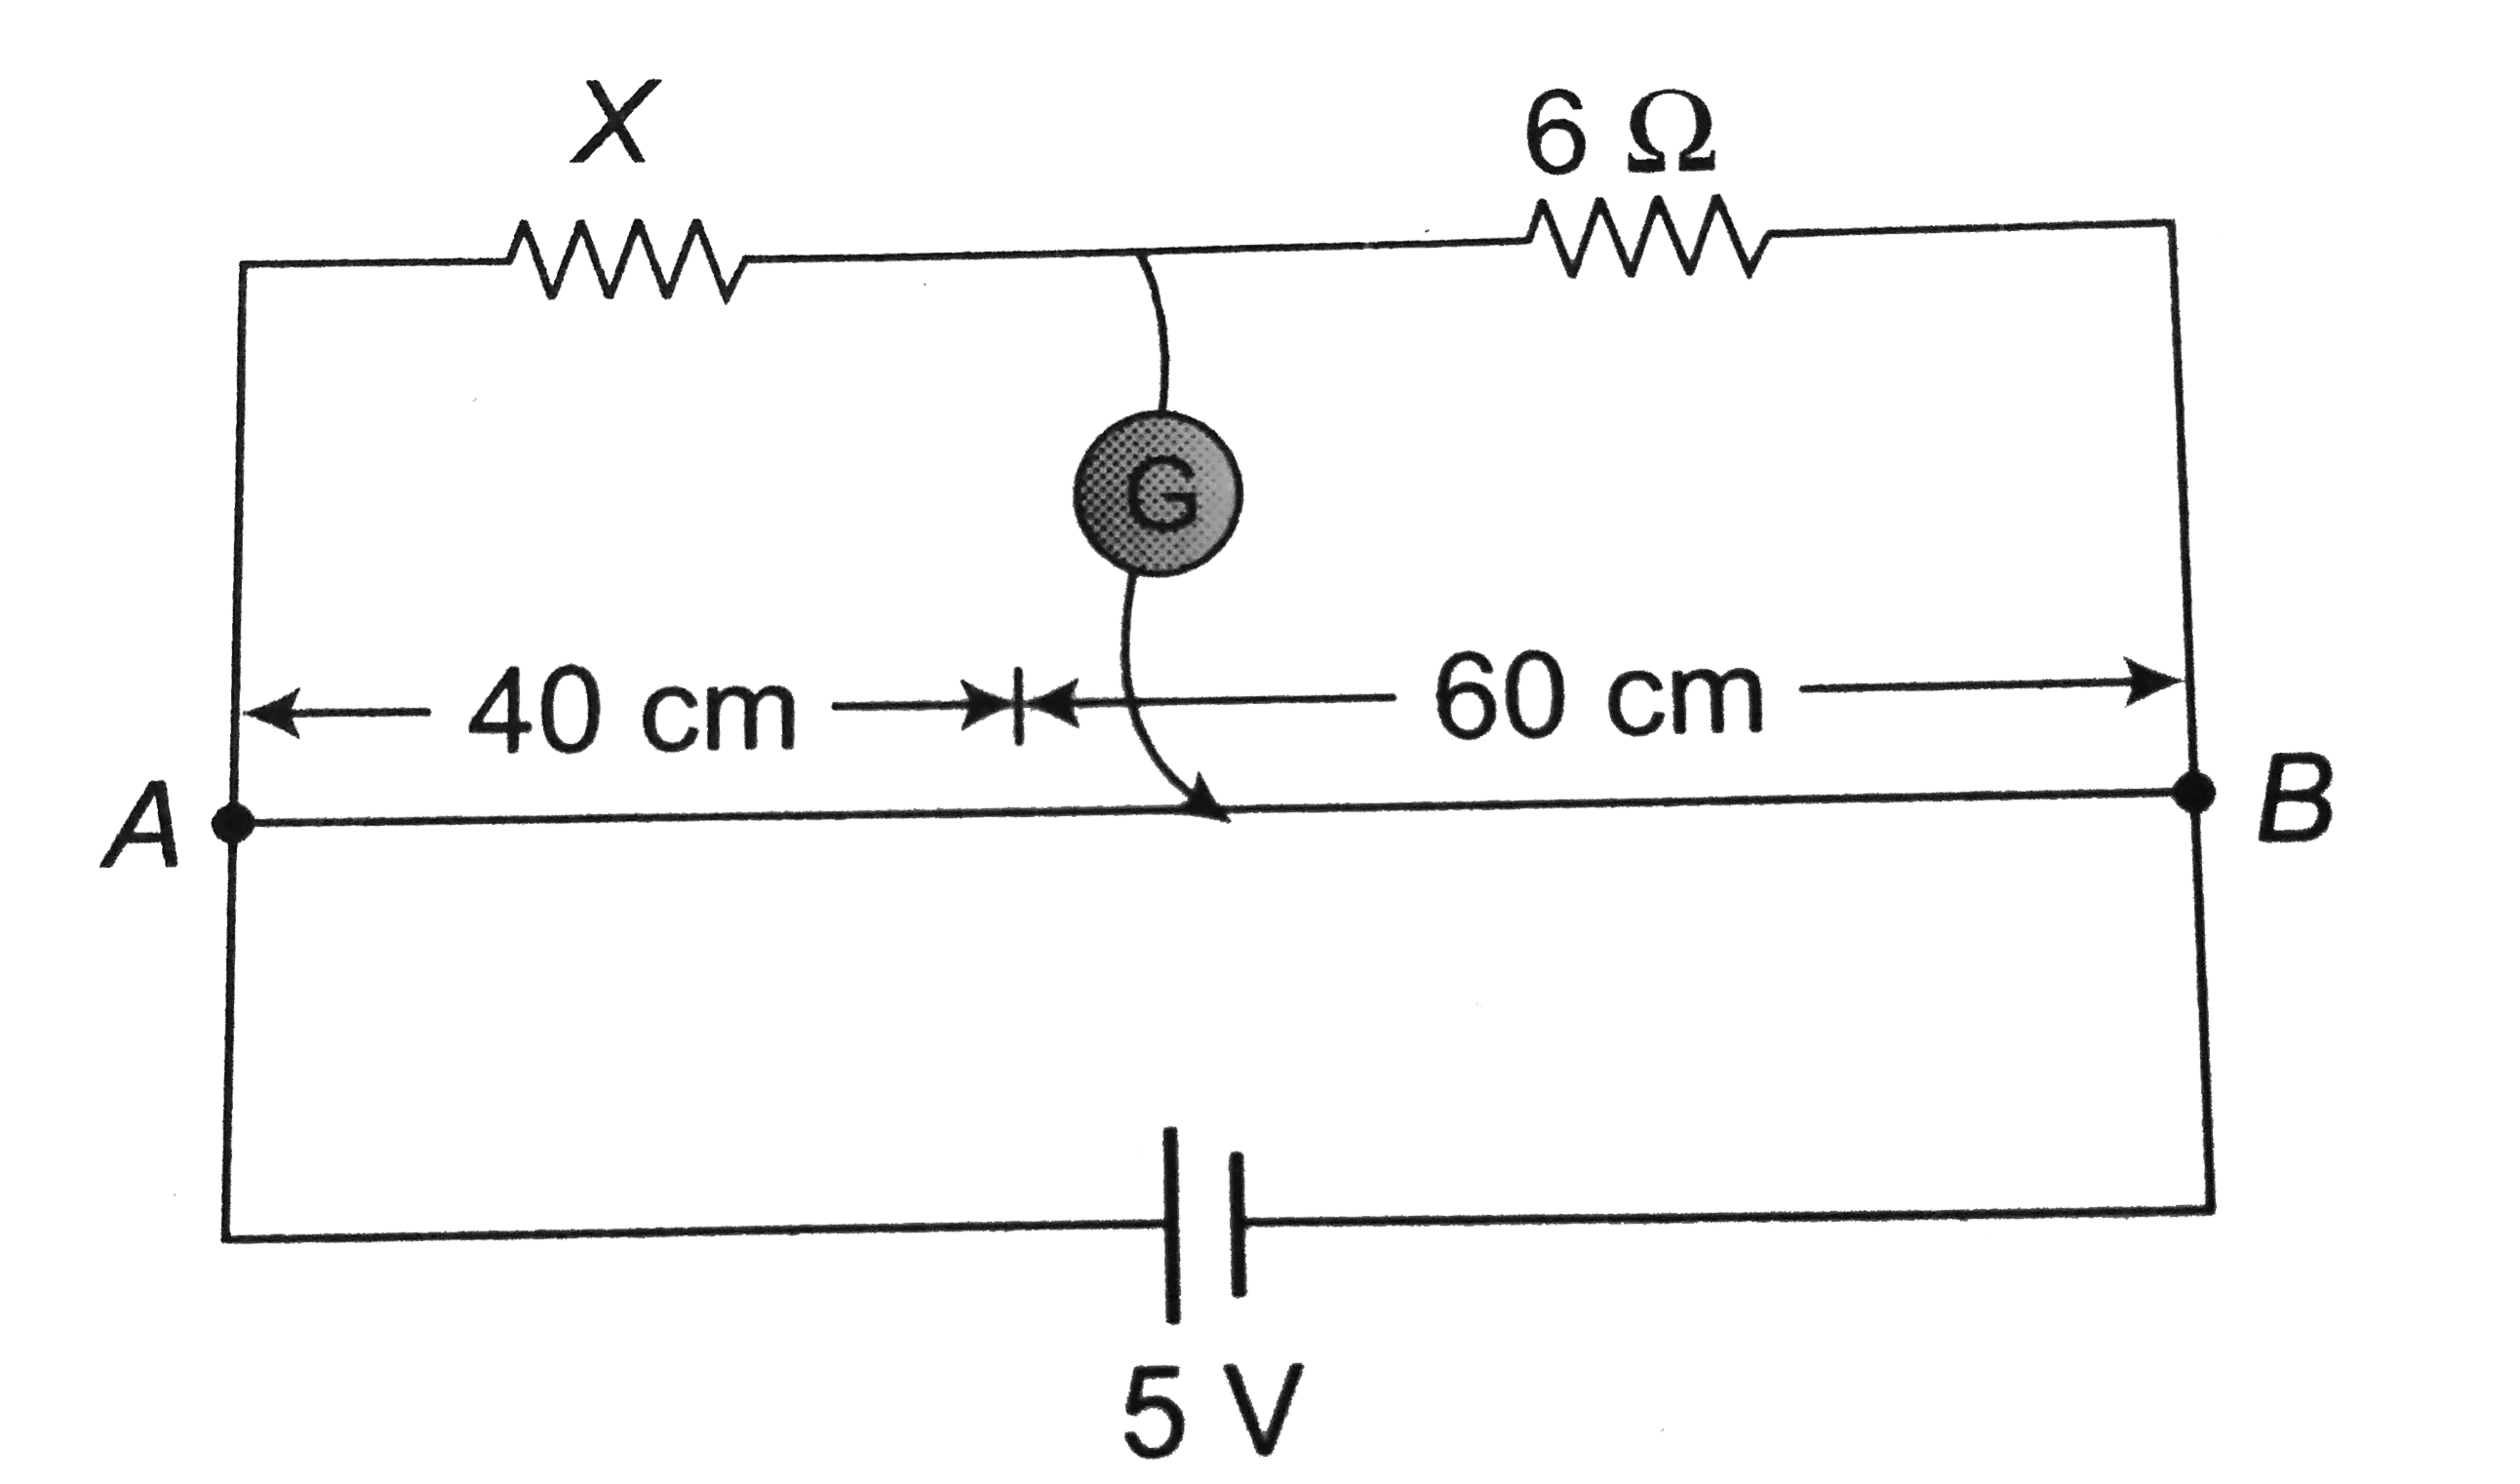 In the circuit shown, a meter bridge is in its balanced state. The meter bridge wire has a resistance .1 ohm//cm. The value of unknown resistance X and the current drawn from the battery of negligible resistance is